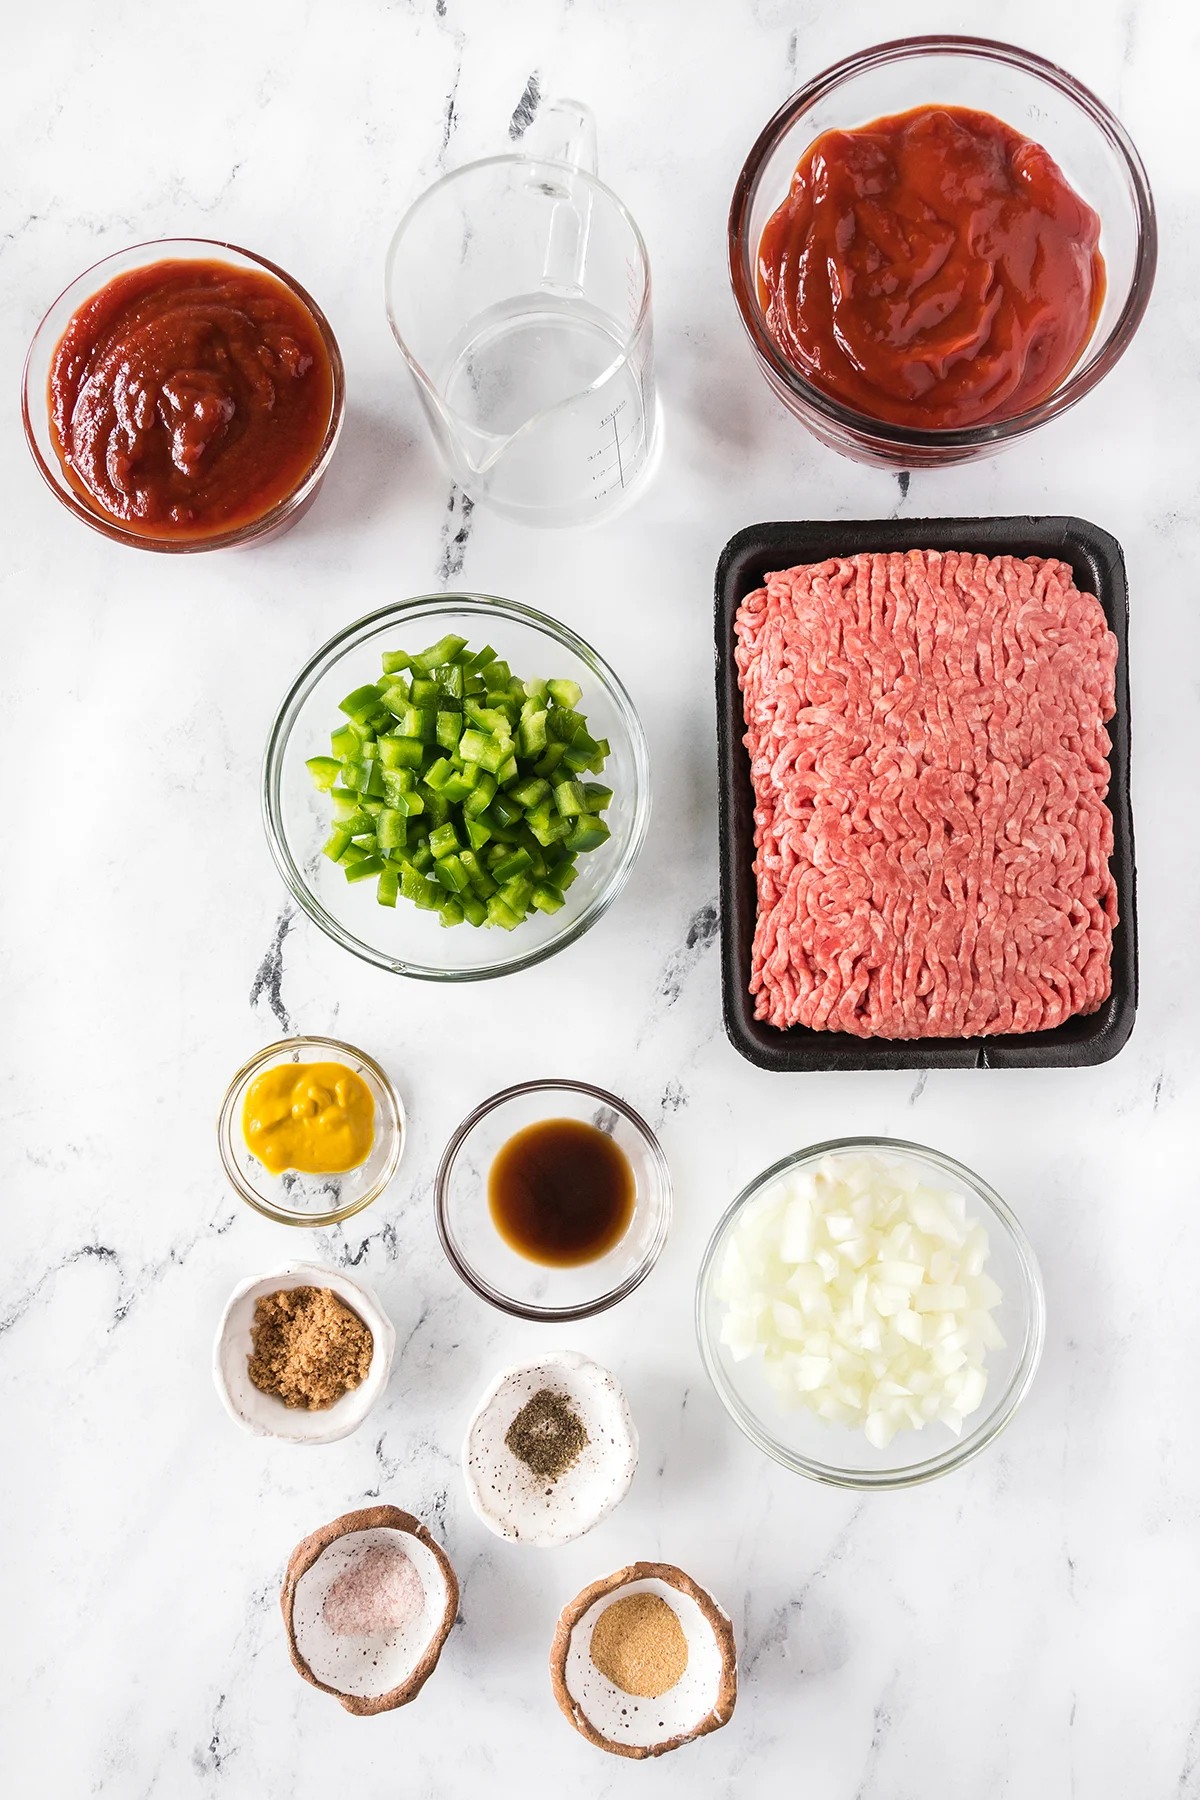 ingredients laid out on a table to make classic sloppy joes